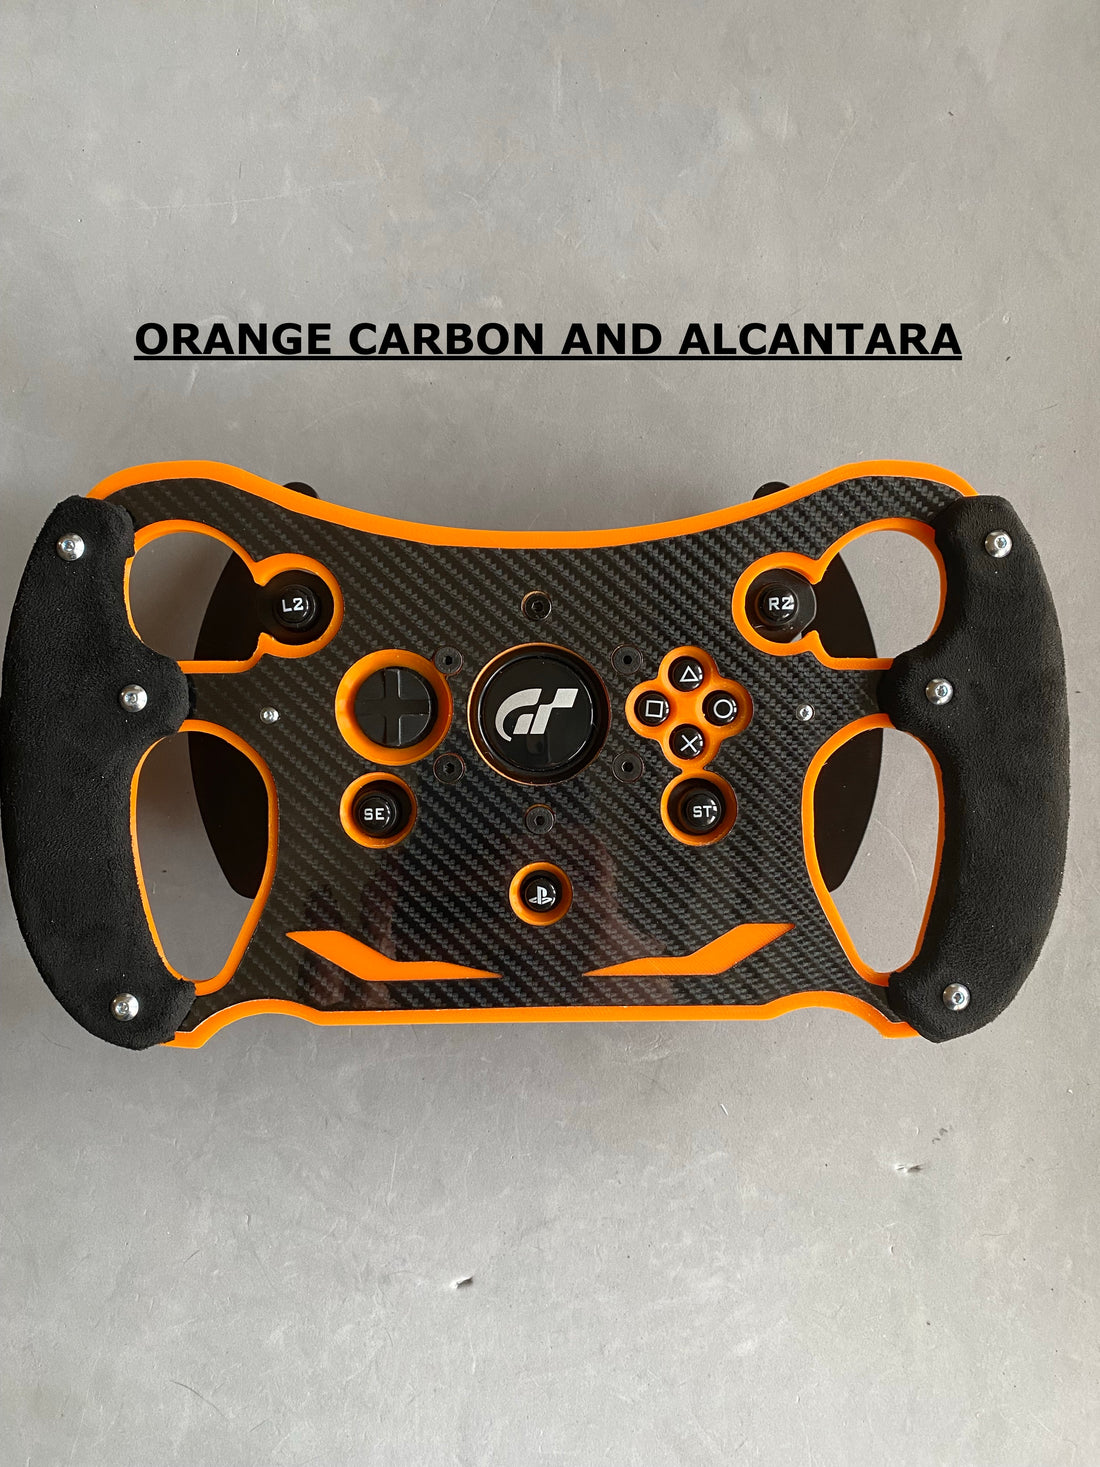 New Alcantara GT3 Open Wheel Mod for Thrustmaster T300, different colors